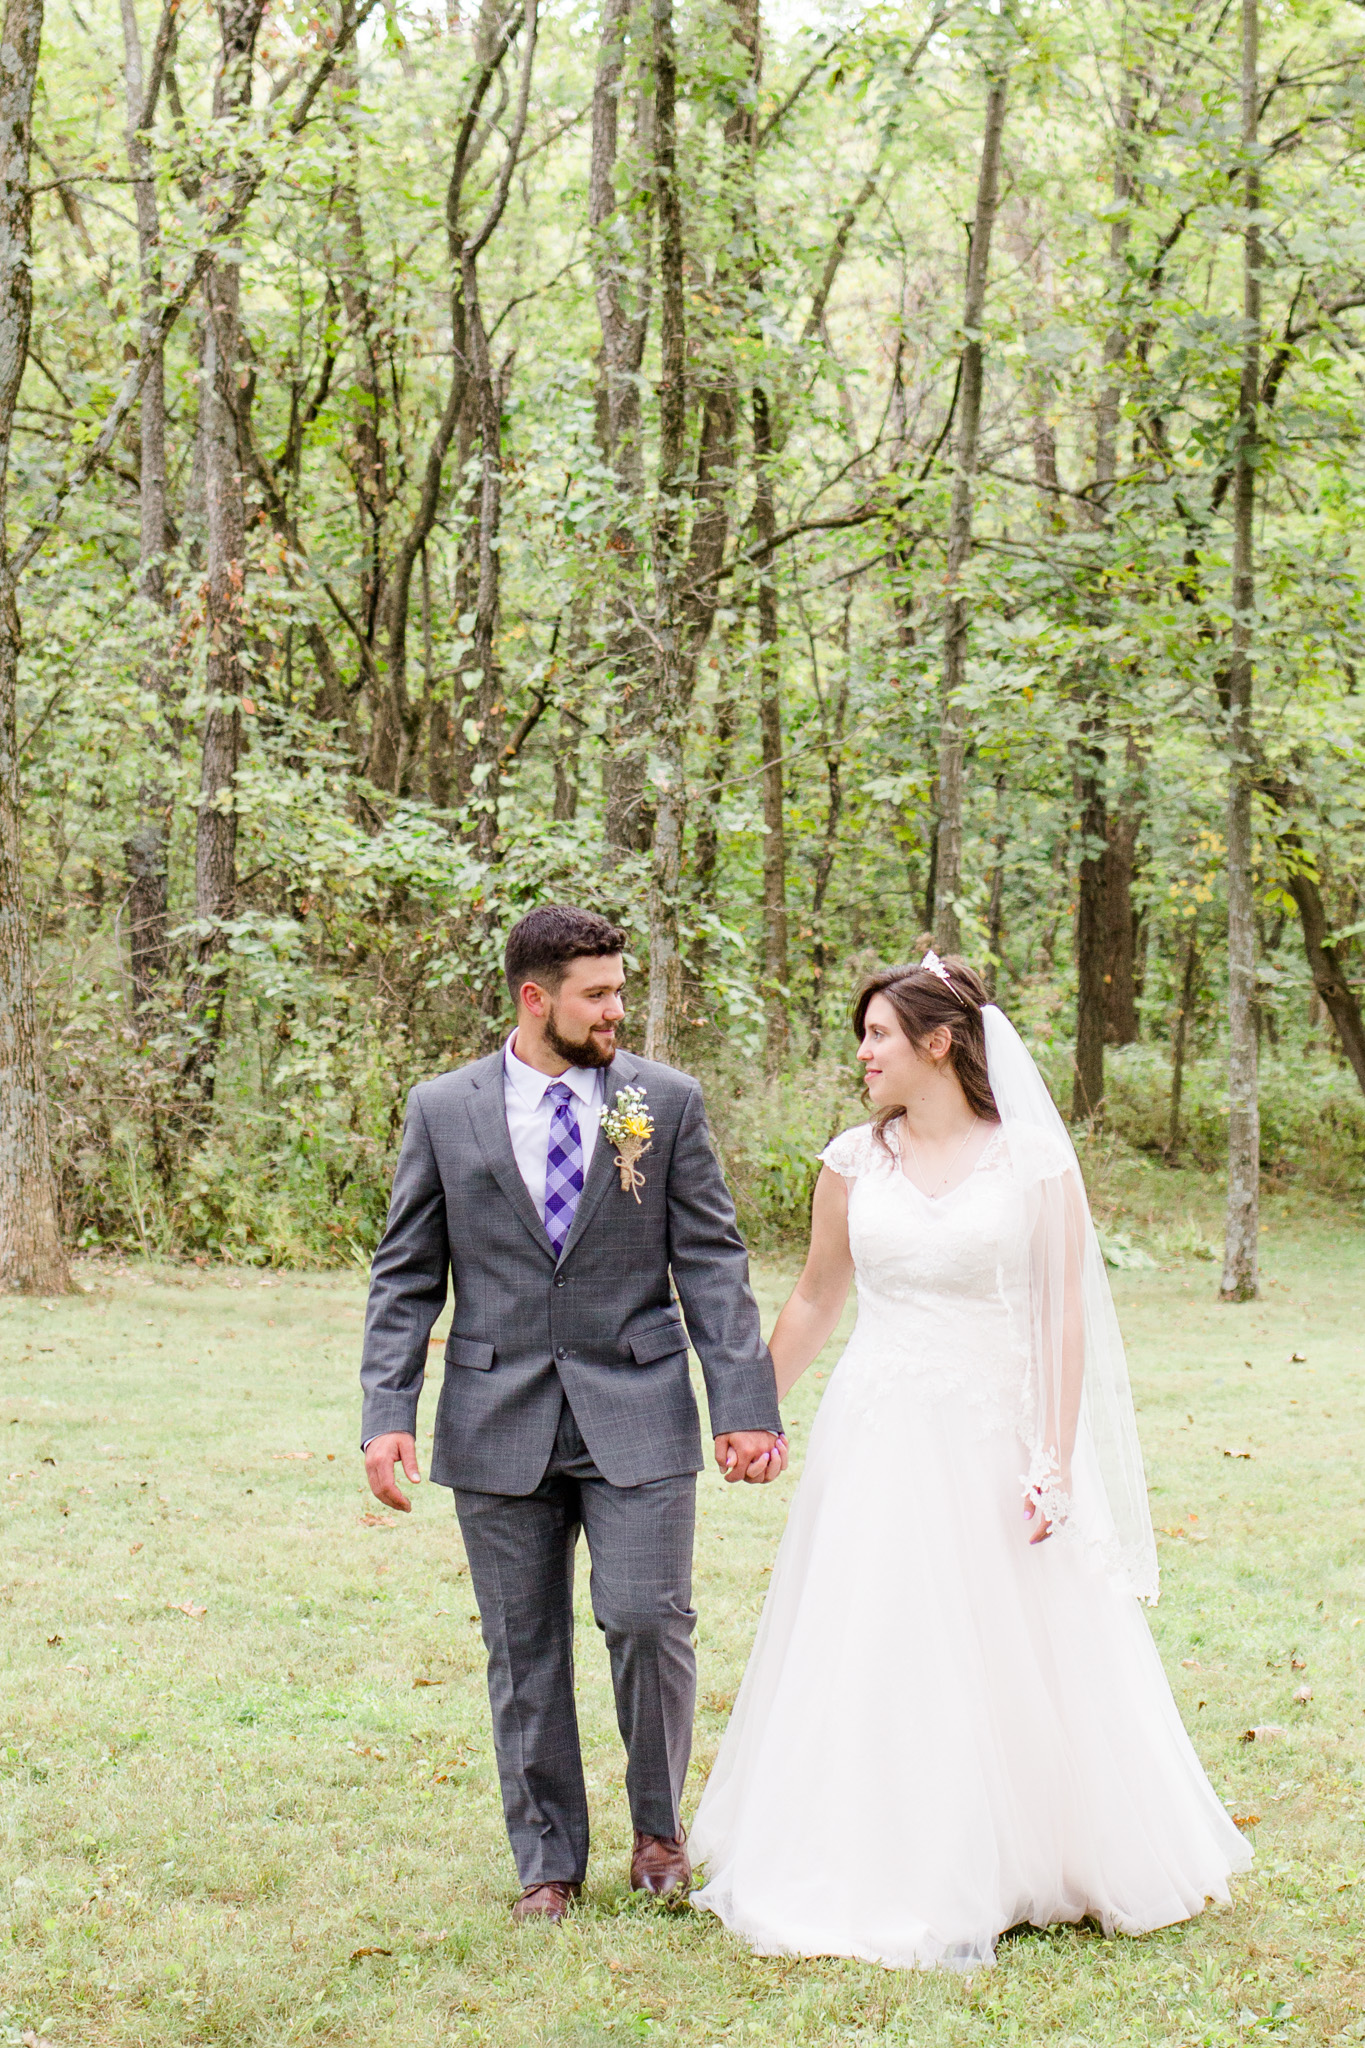 Beaded blush wedding dress and groom with gray suit